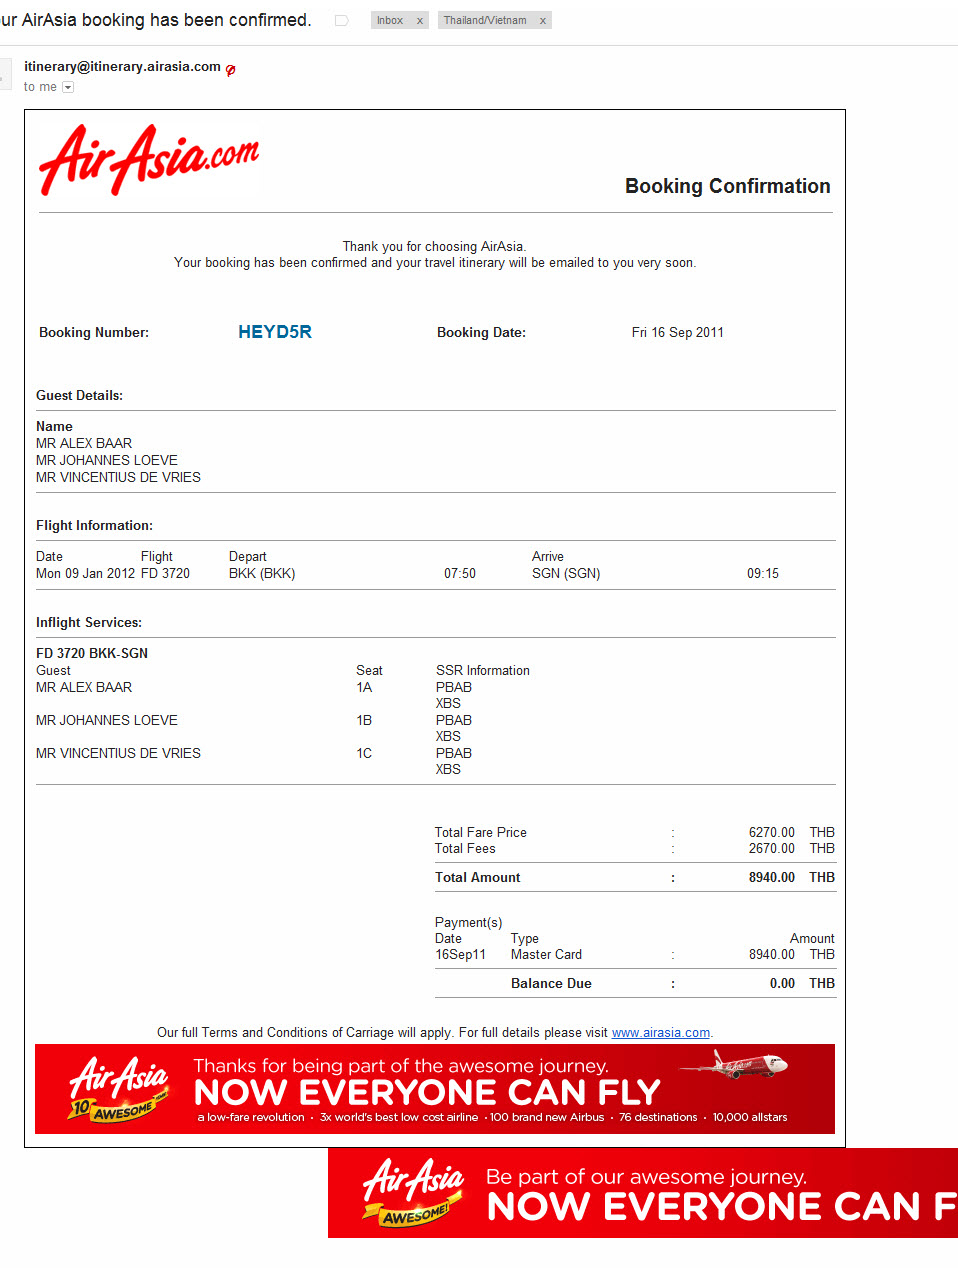 Search cheap and promo AirAsia flight tickets here!